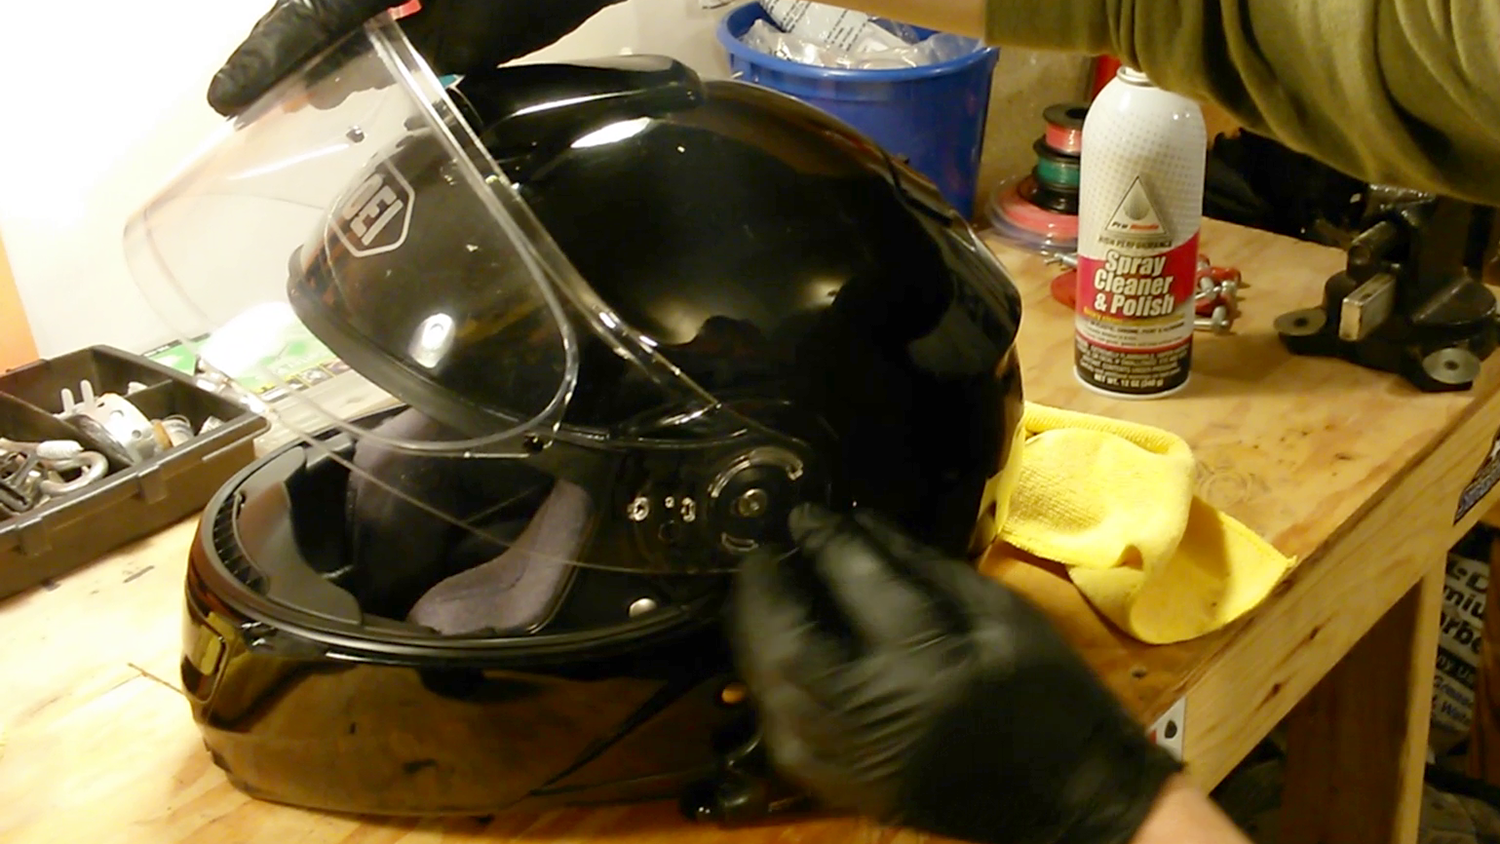 How To Clean Your Motorcycle Helmet (Inside And Out) ~ TRO